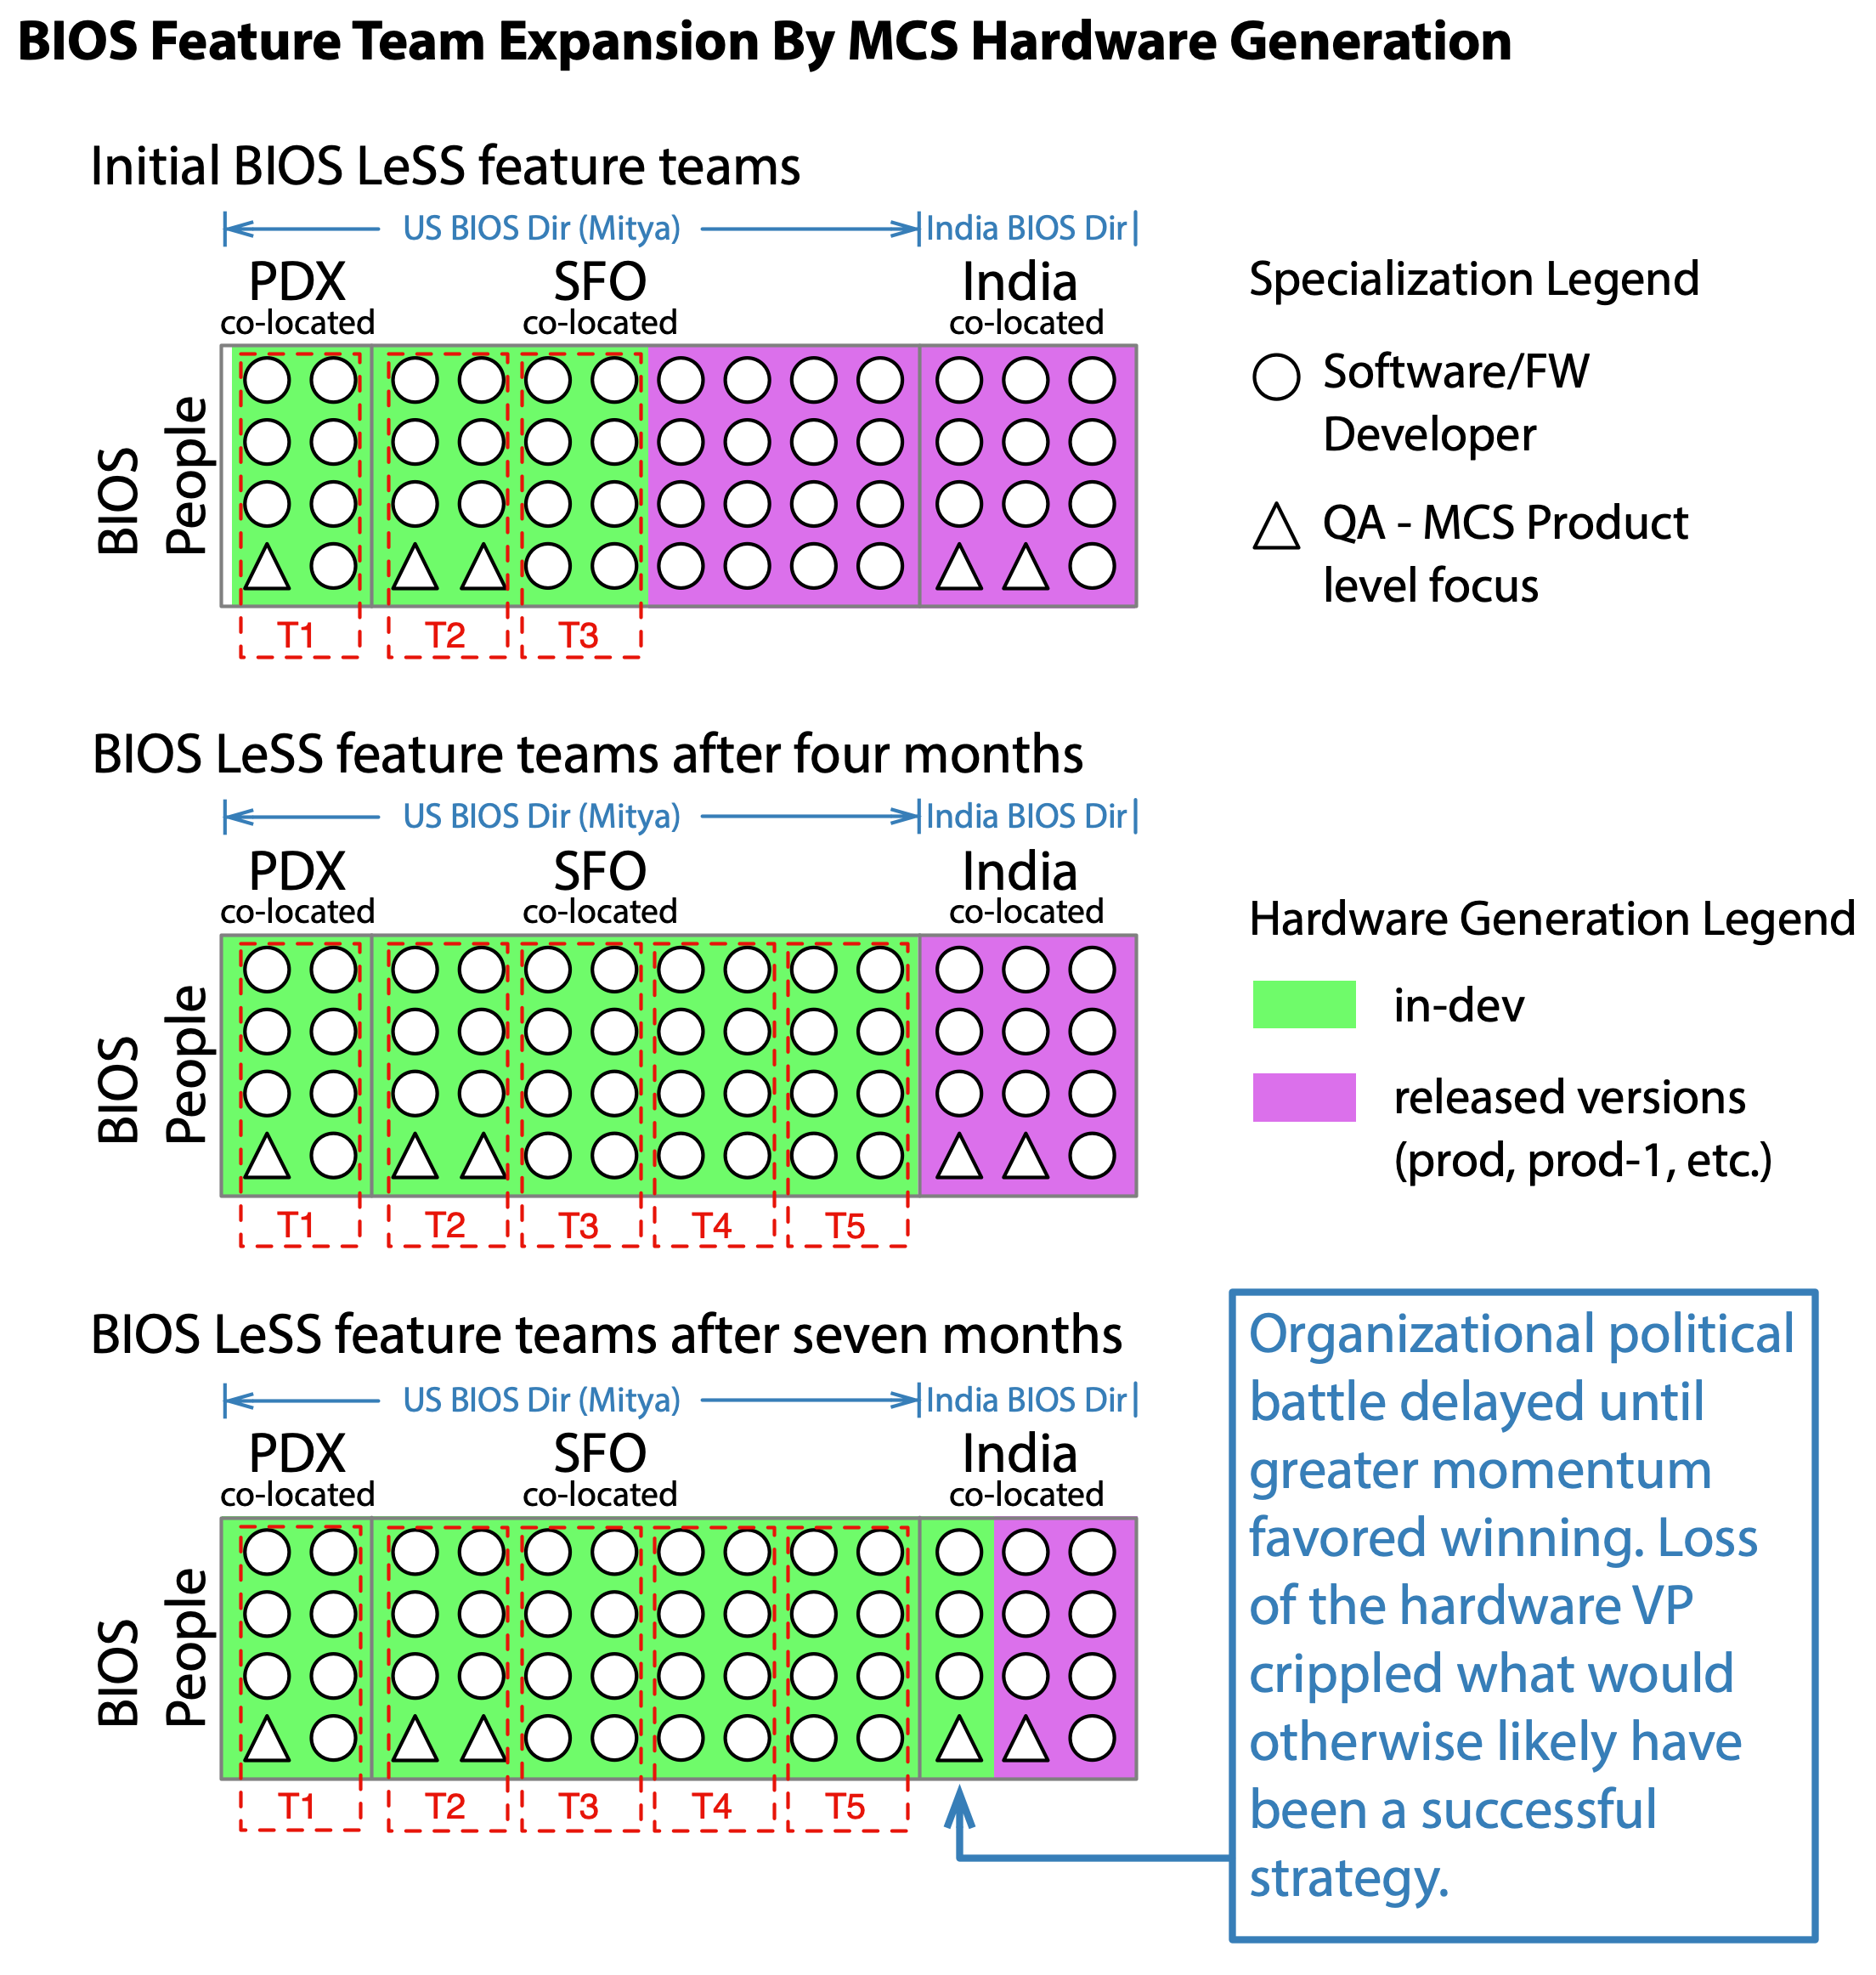 BIOS Feature Team Expansion By Hardware Generation